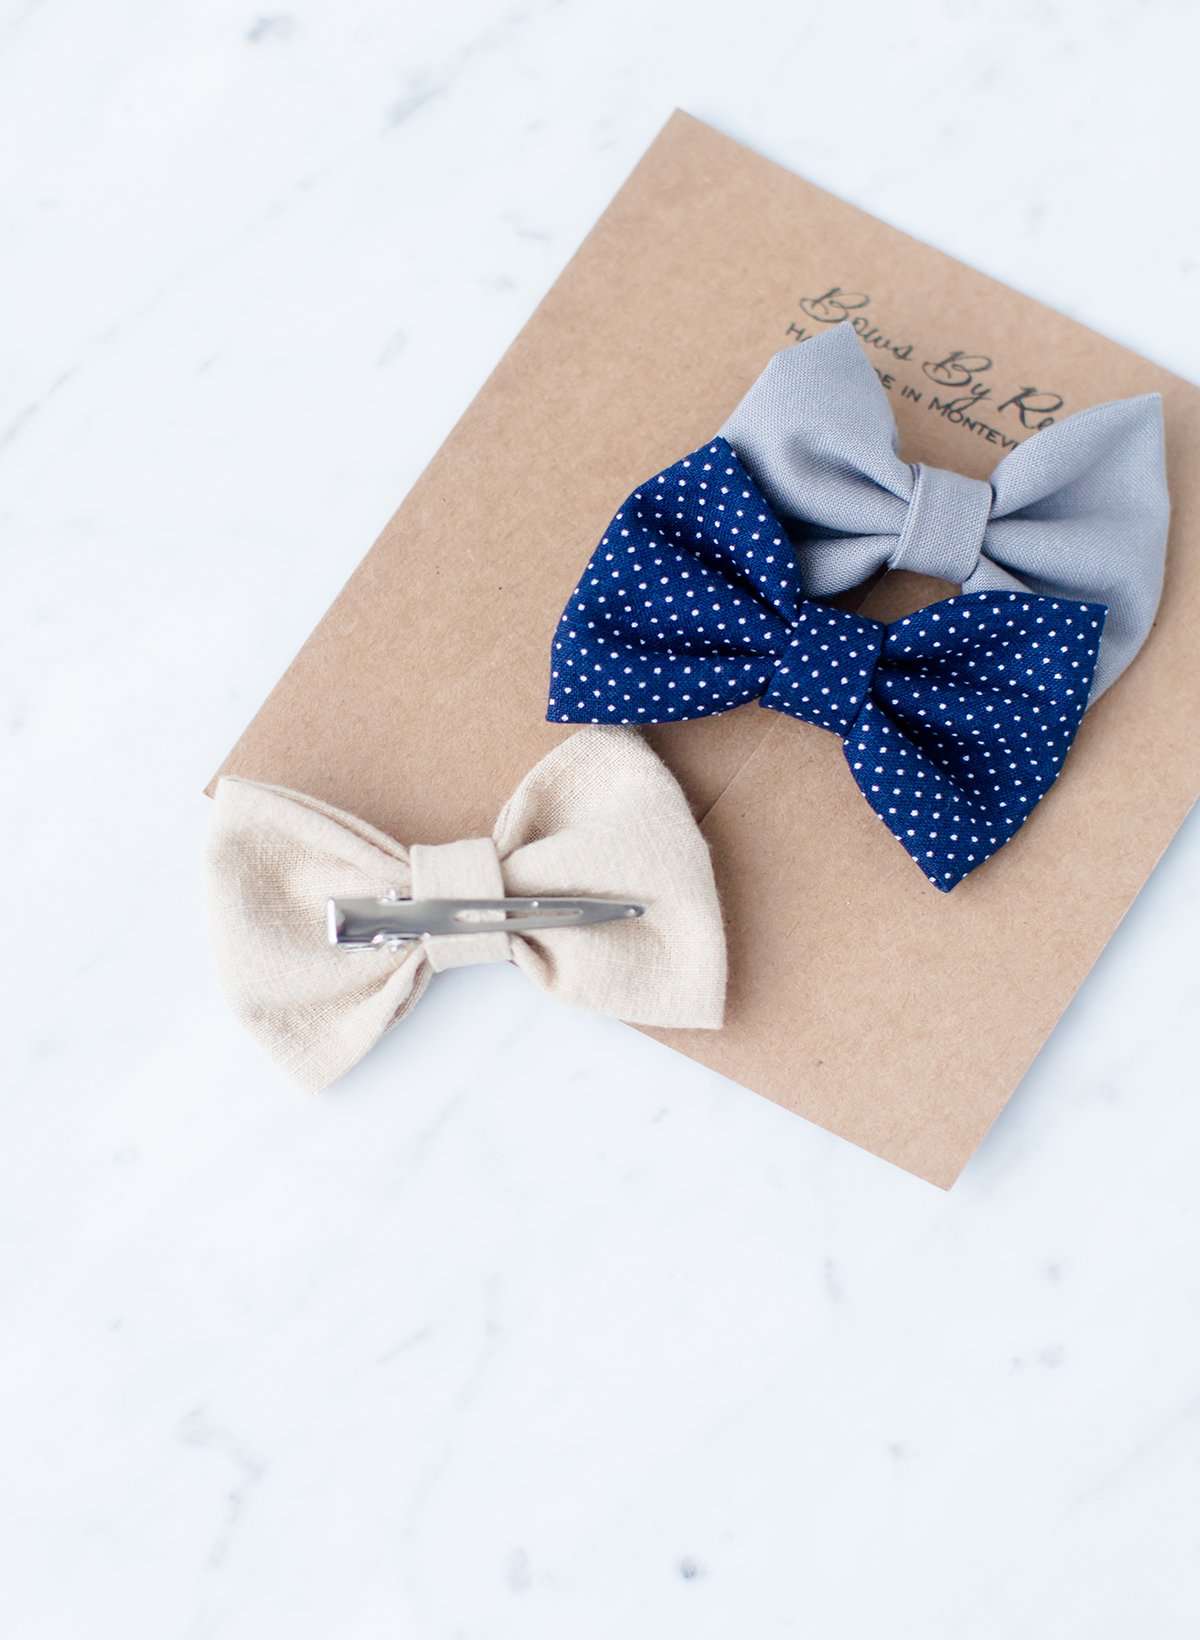 Little girls hair bow set of three. This shows a gray, taupe and navy polka dot headband or alligator clip bow.